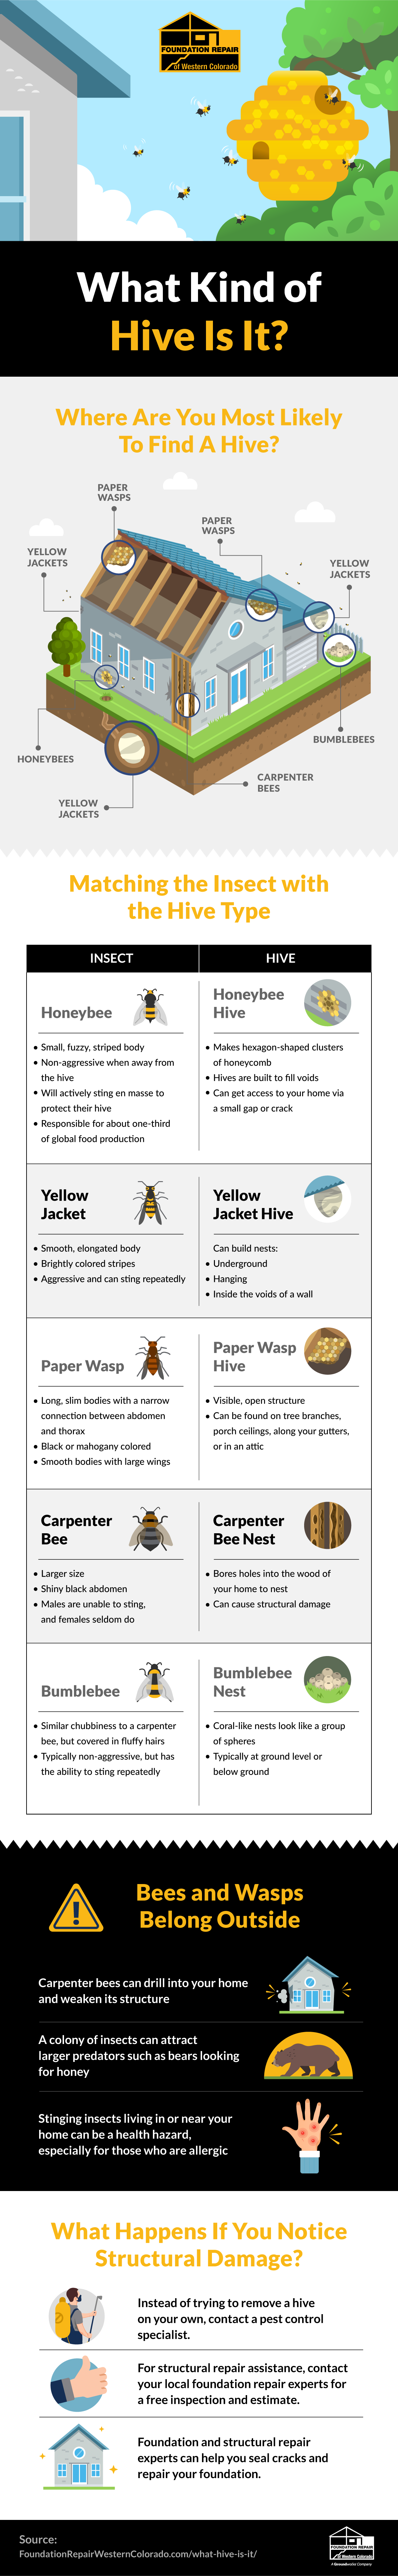 Removing Bee and Wasp Hives From Your Home